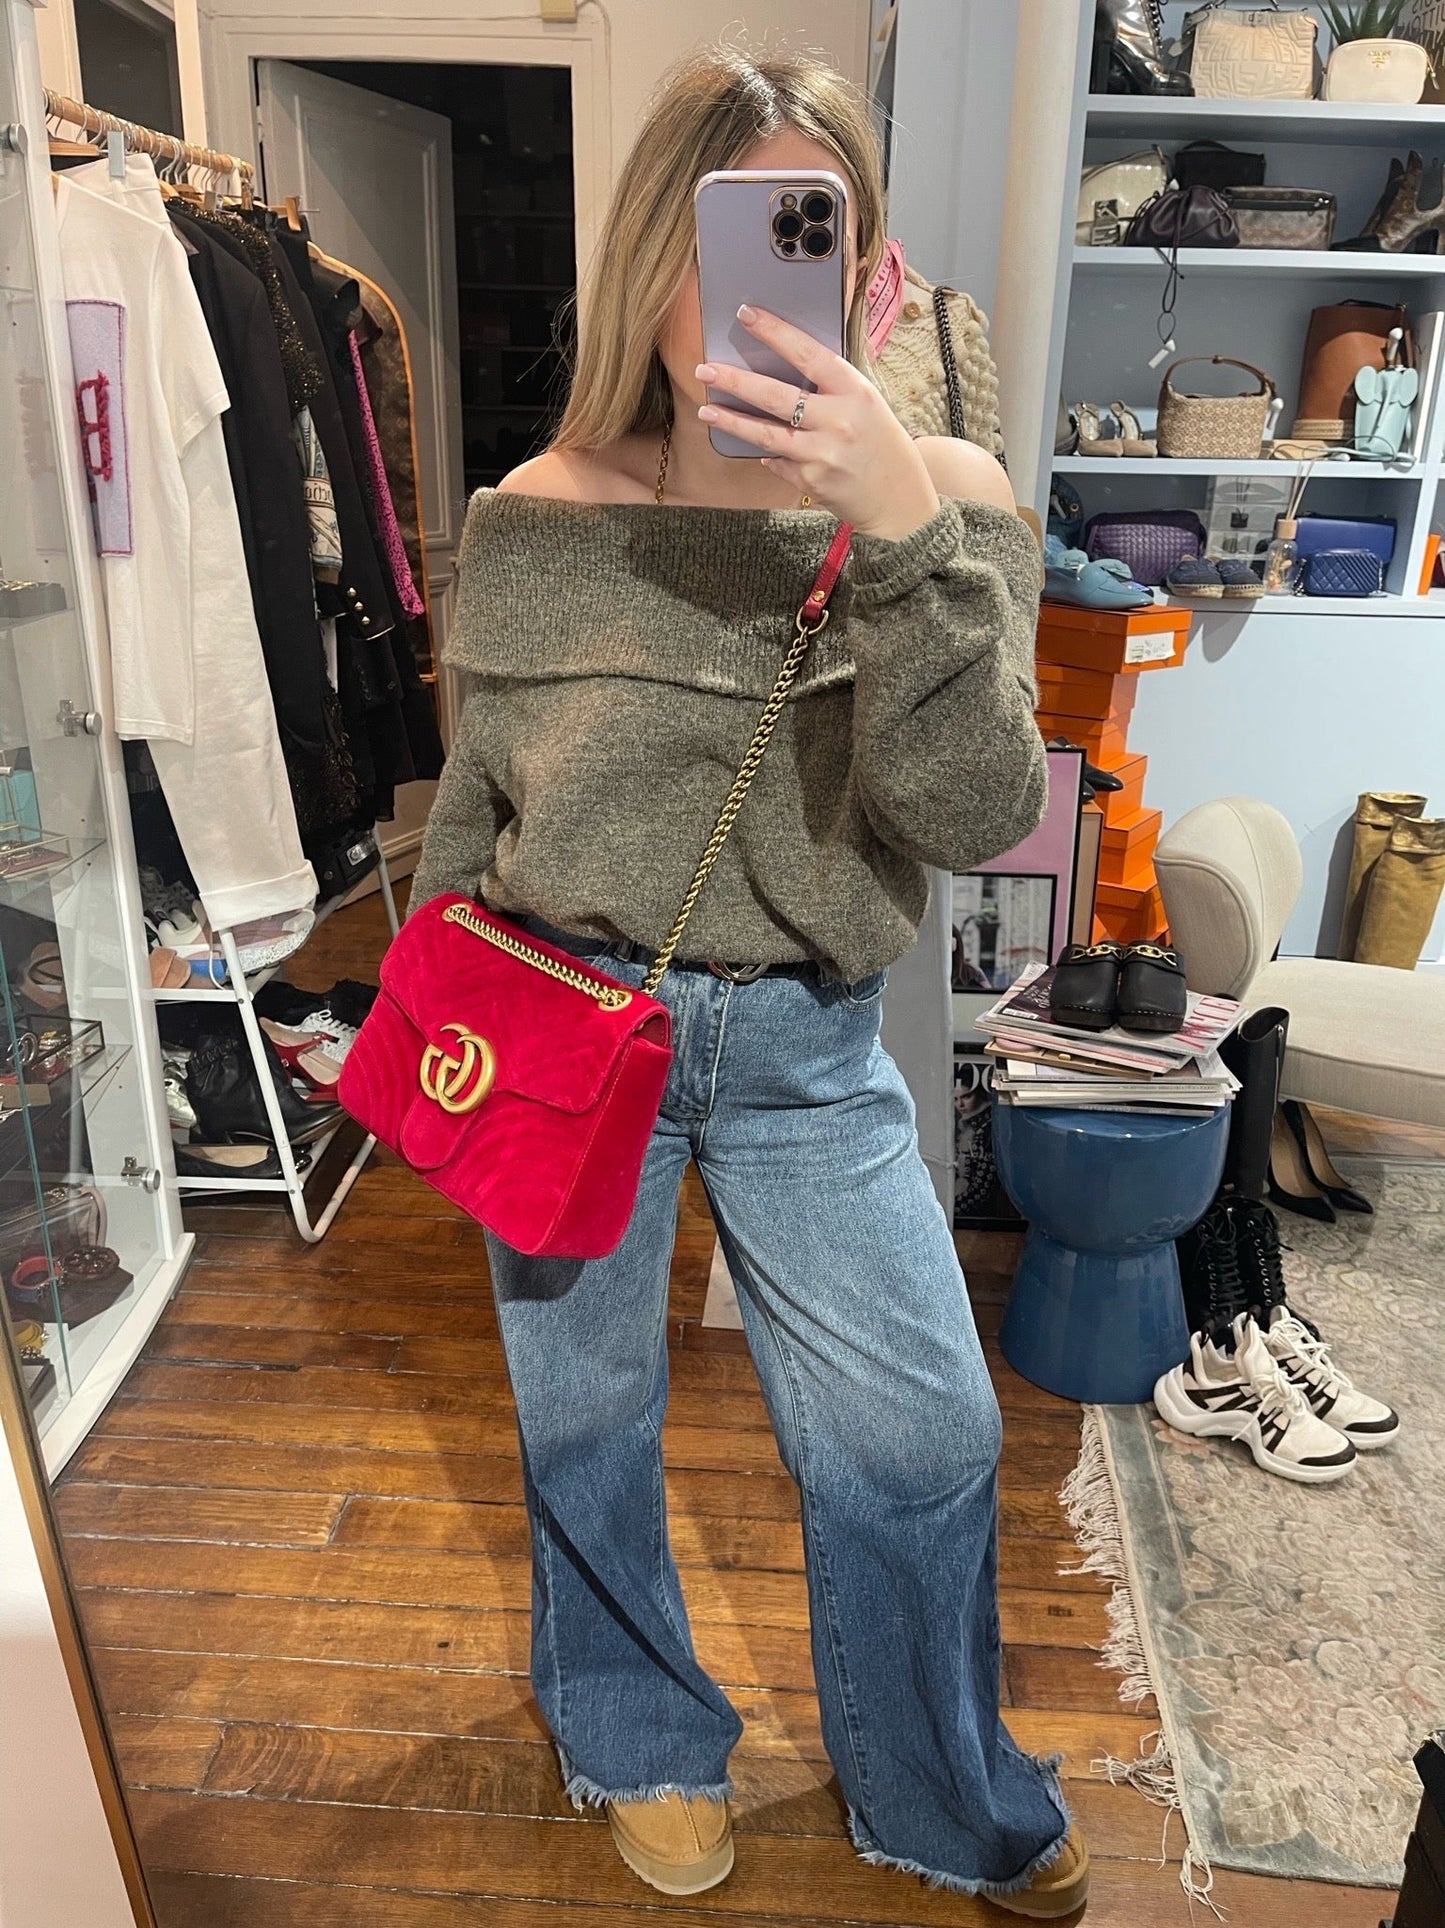 Sac Gucci Marmont rouge